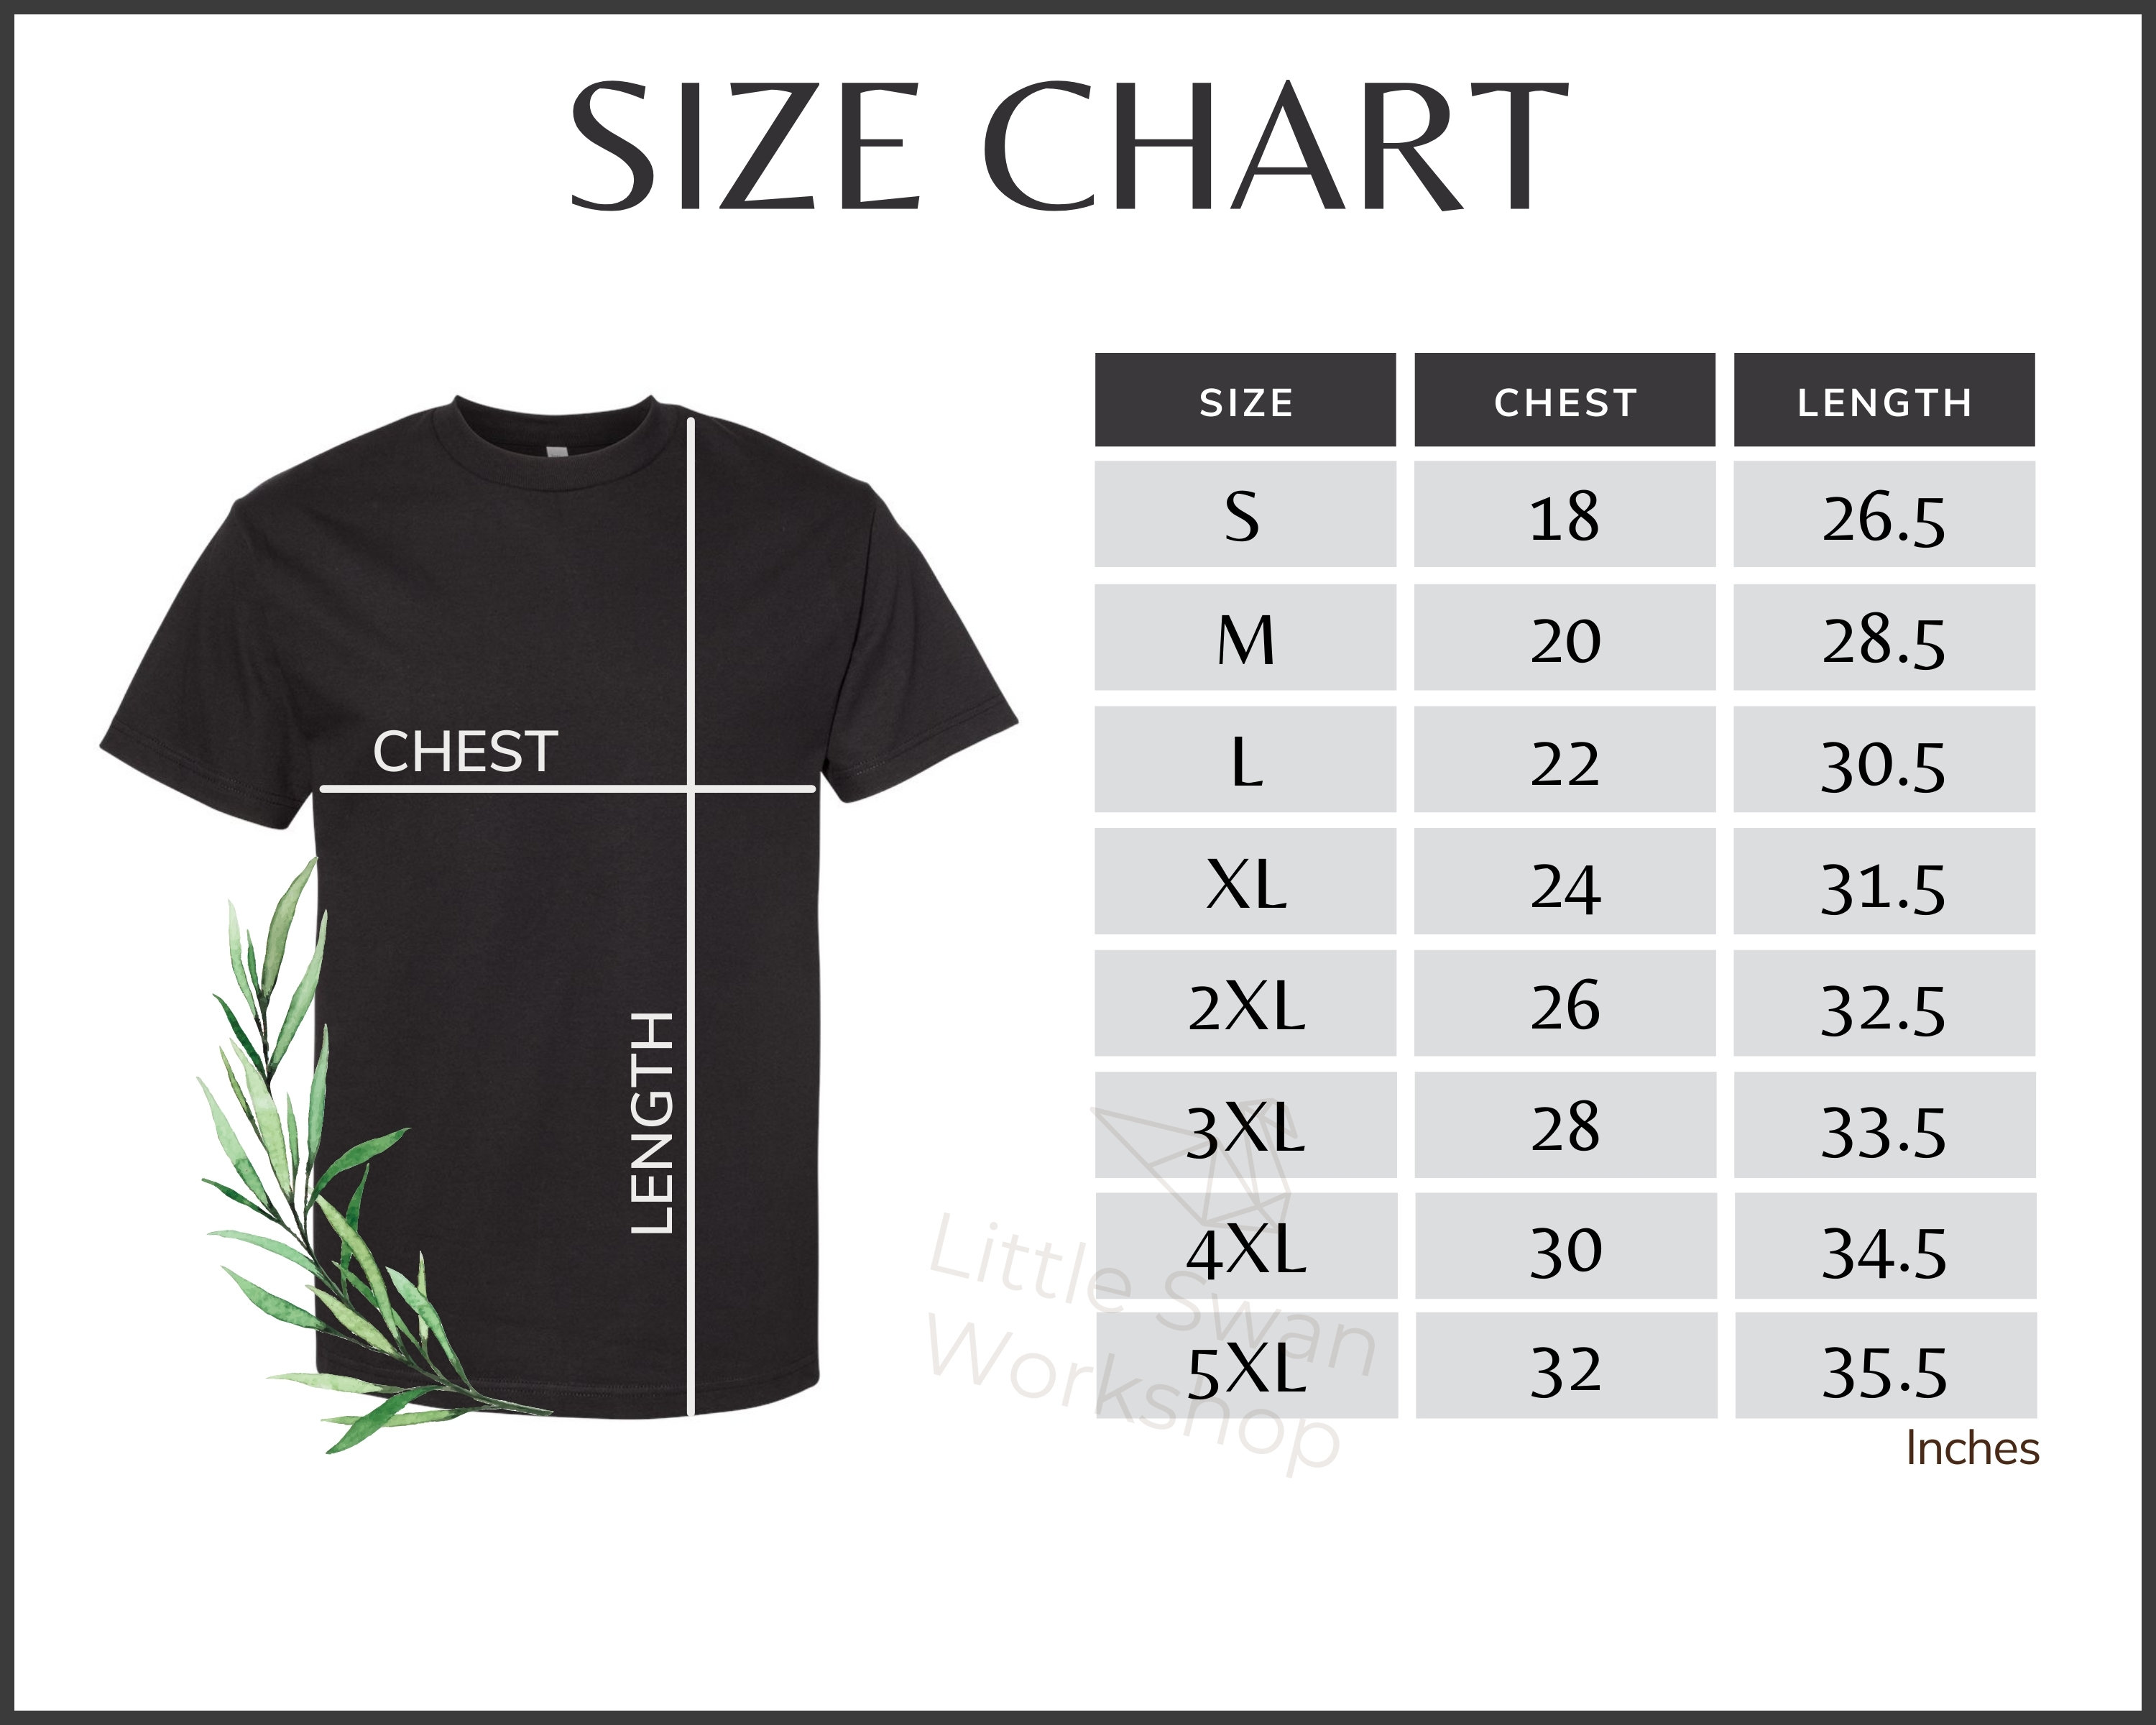 Alstyle 1301 Size Chart, Alstyle 1301 Classic T-shirt Size Guide